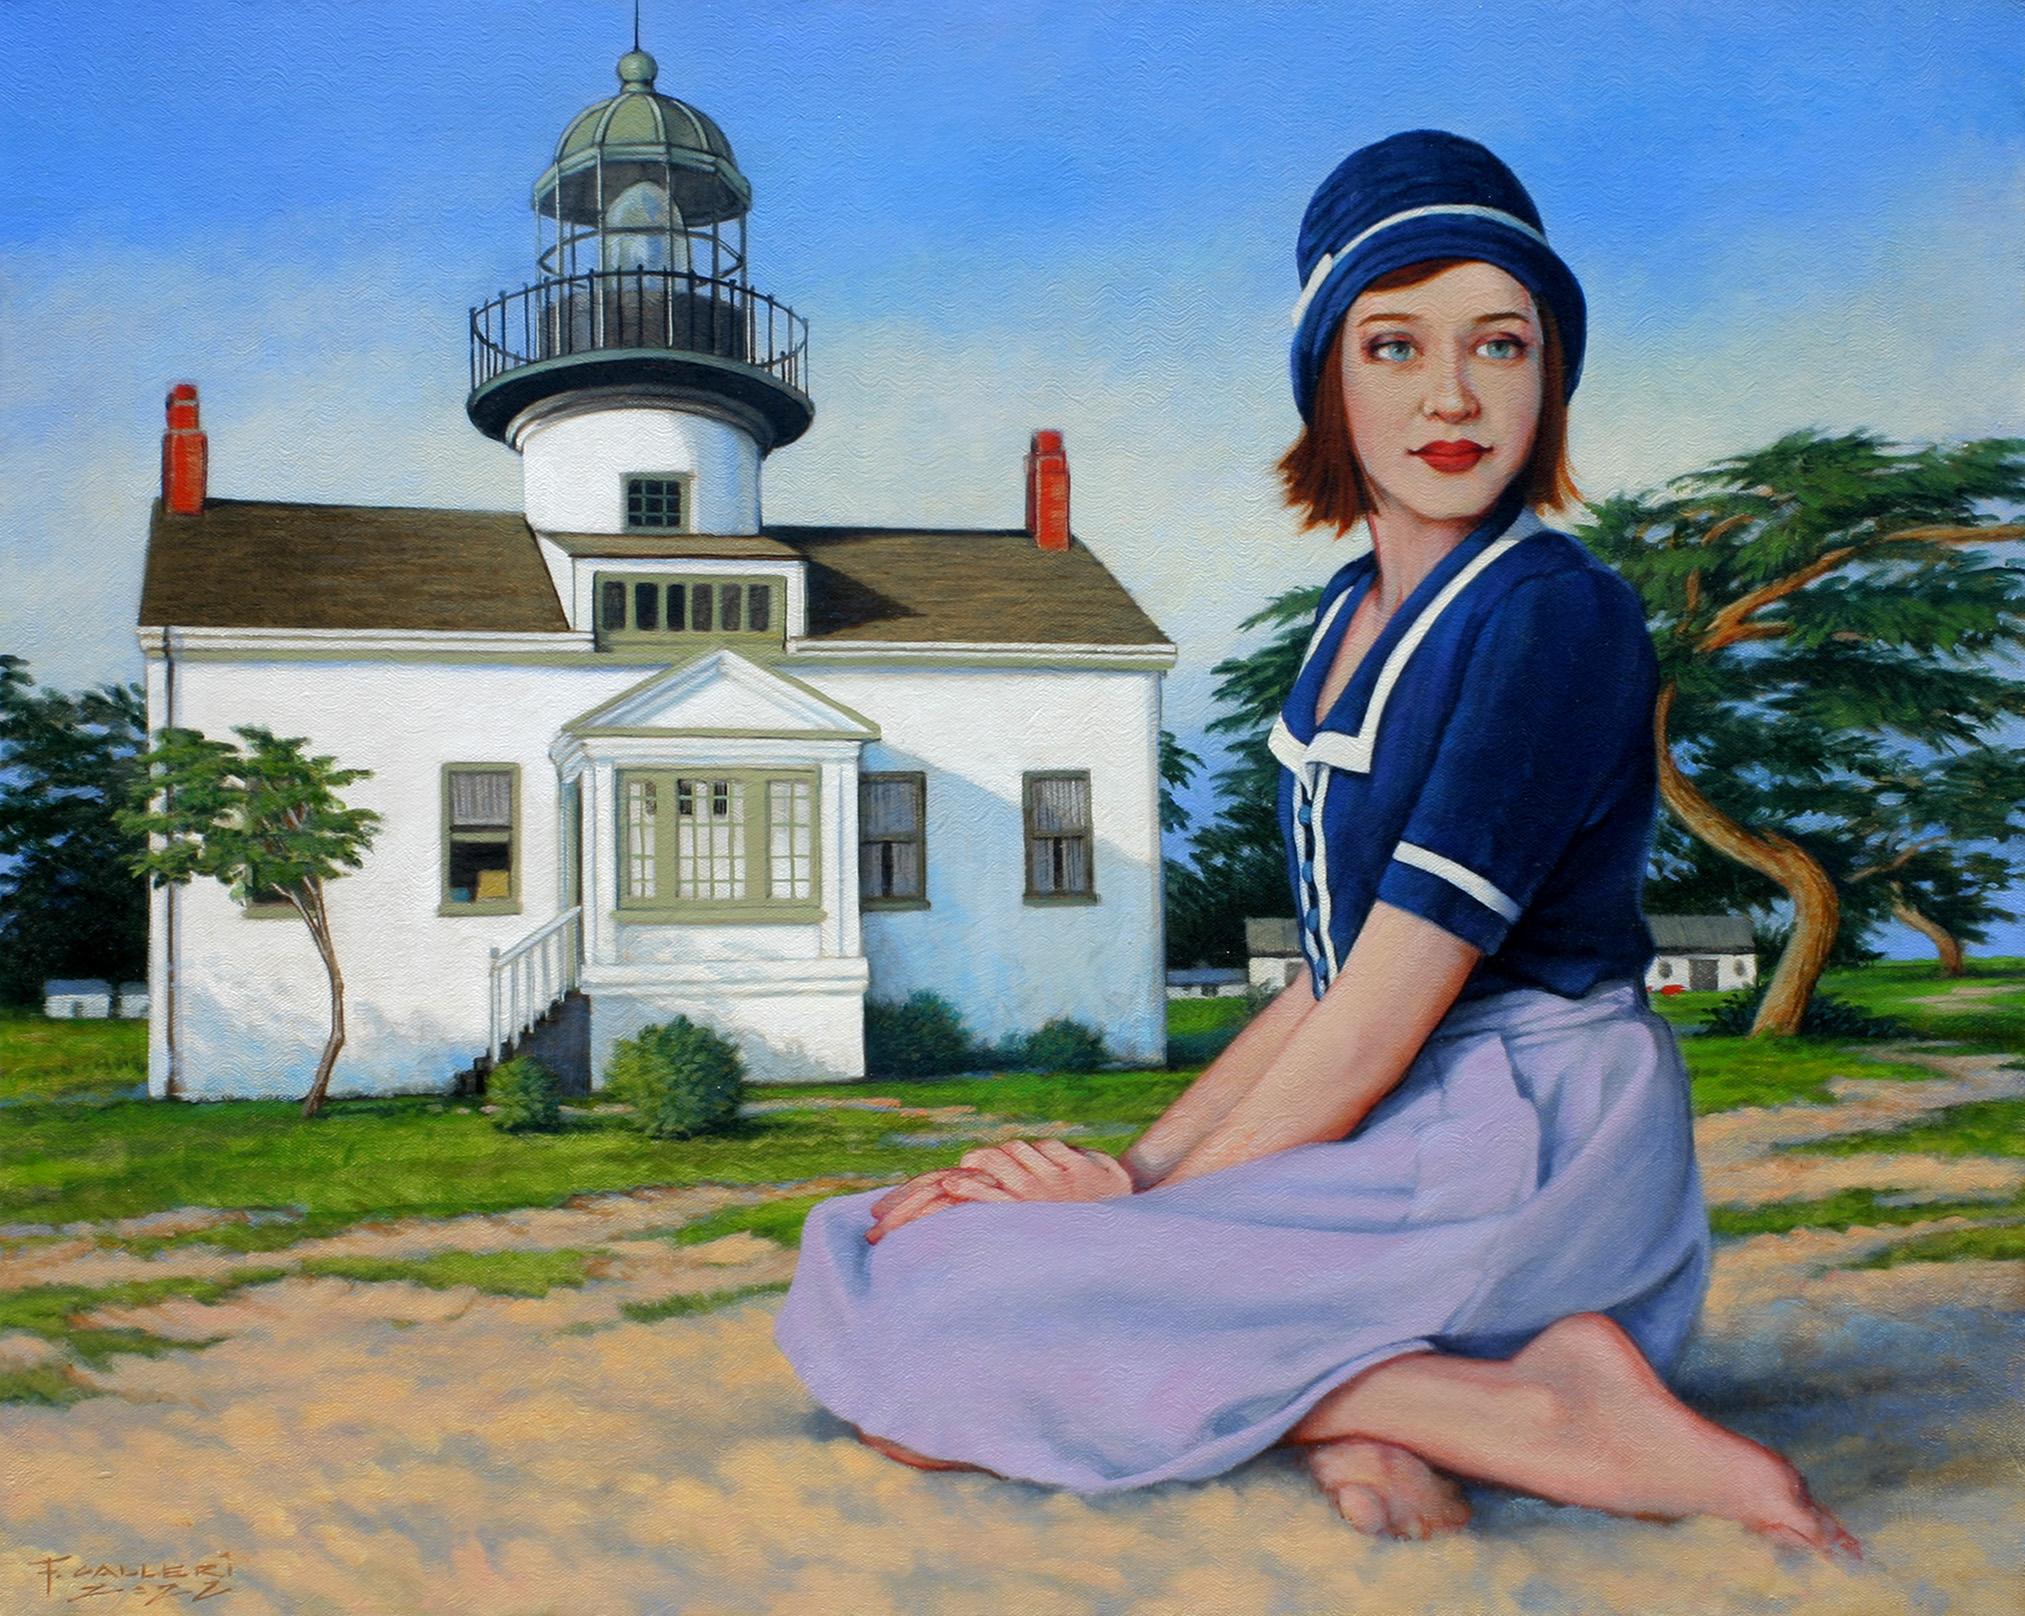 Fred Calleri Figurative Painting - "The Promontory" Woman in blue and purple posing in front of white house.